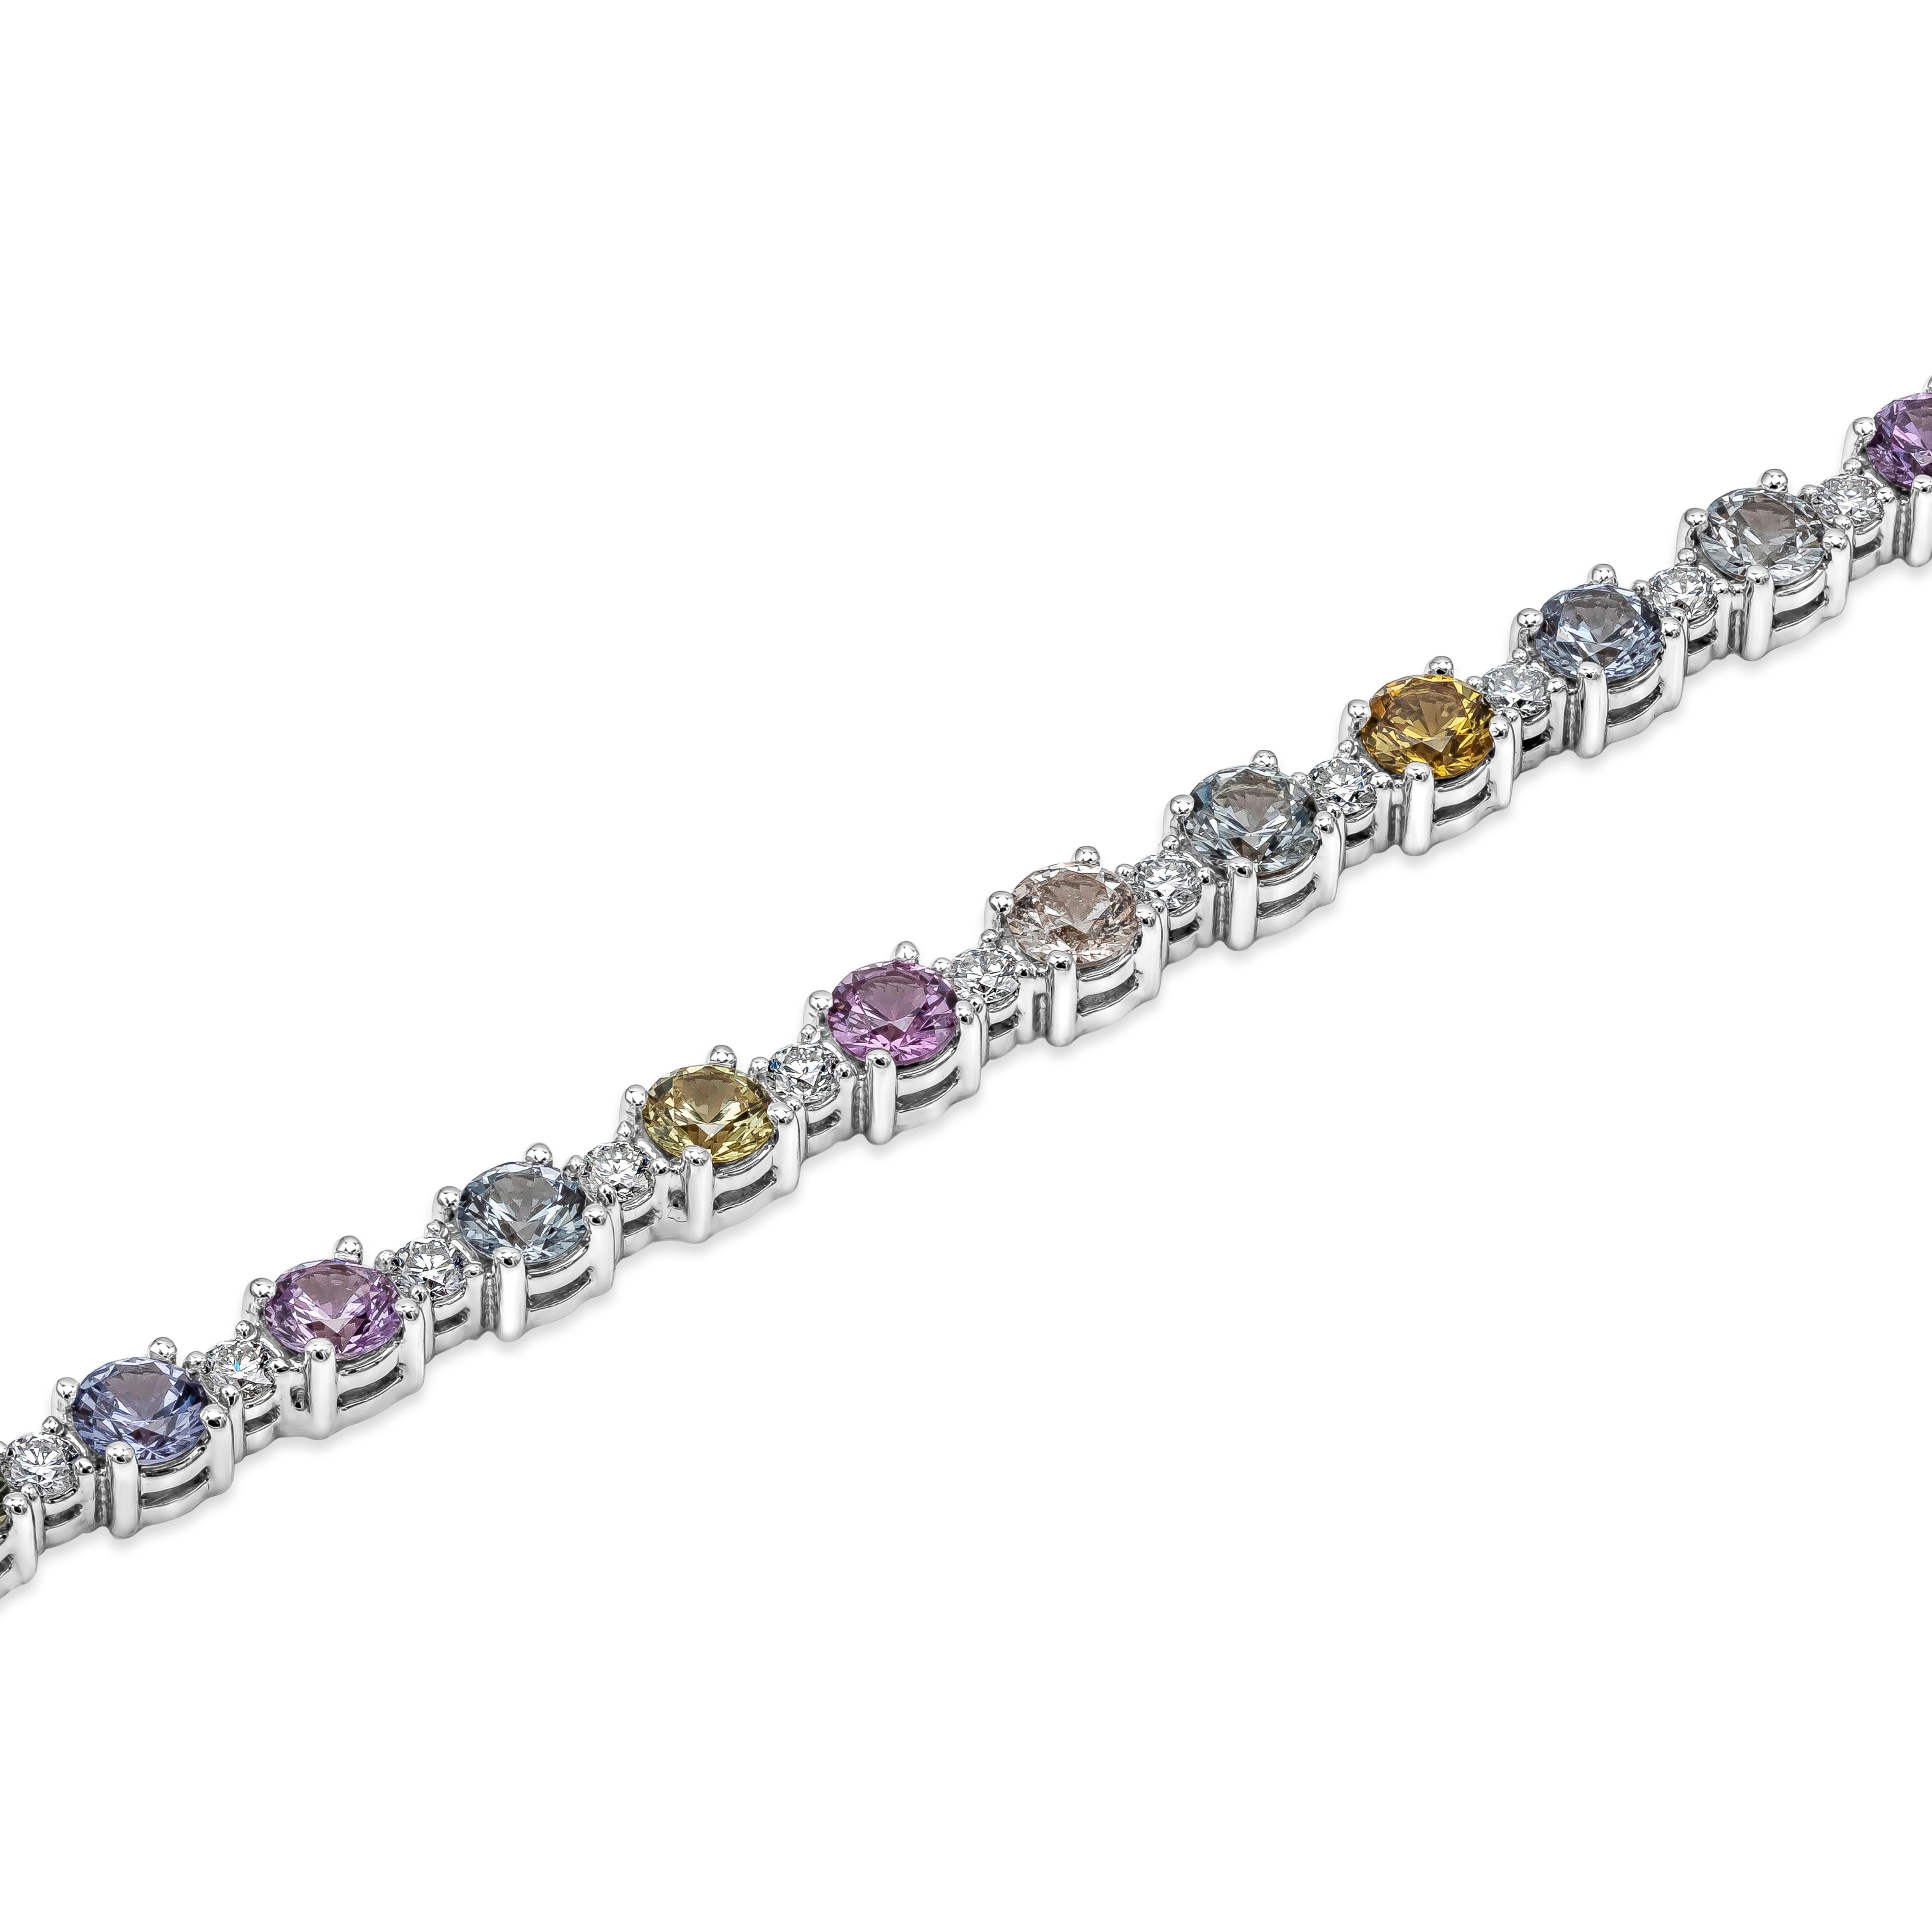 This unique and stylish tennis bracelet showcases a row of round shape multi-color sapphires, evenly spaced by round brilliant diamonds. Sapphires weigh 6.35 carats total, VVS in Clarity. Diamonds weigh 1.00 carats total, G Color and VS in Clarity.